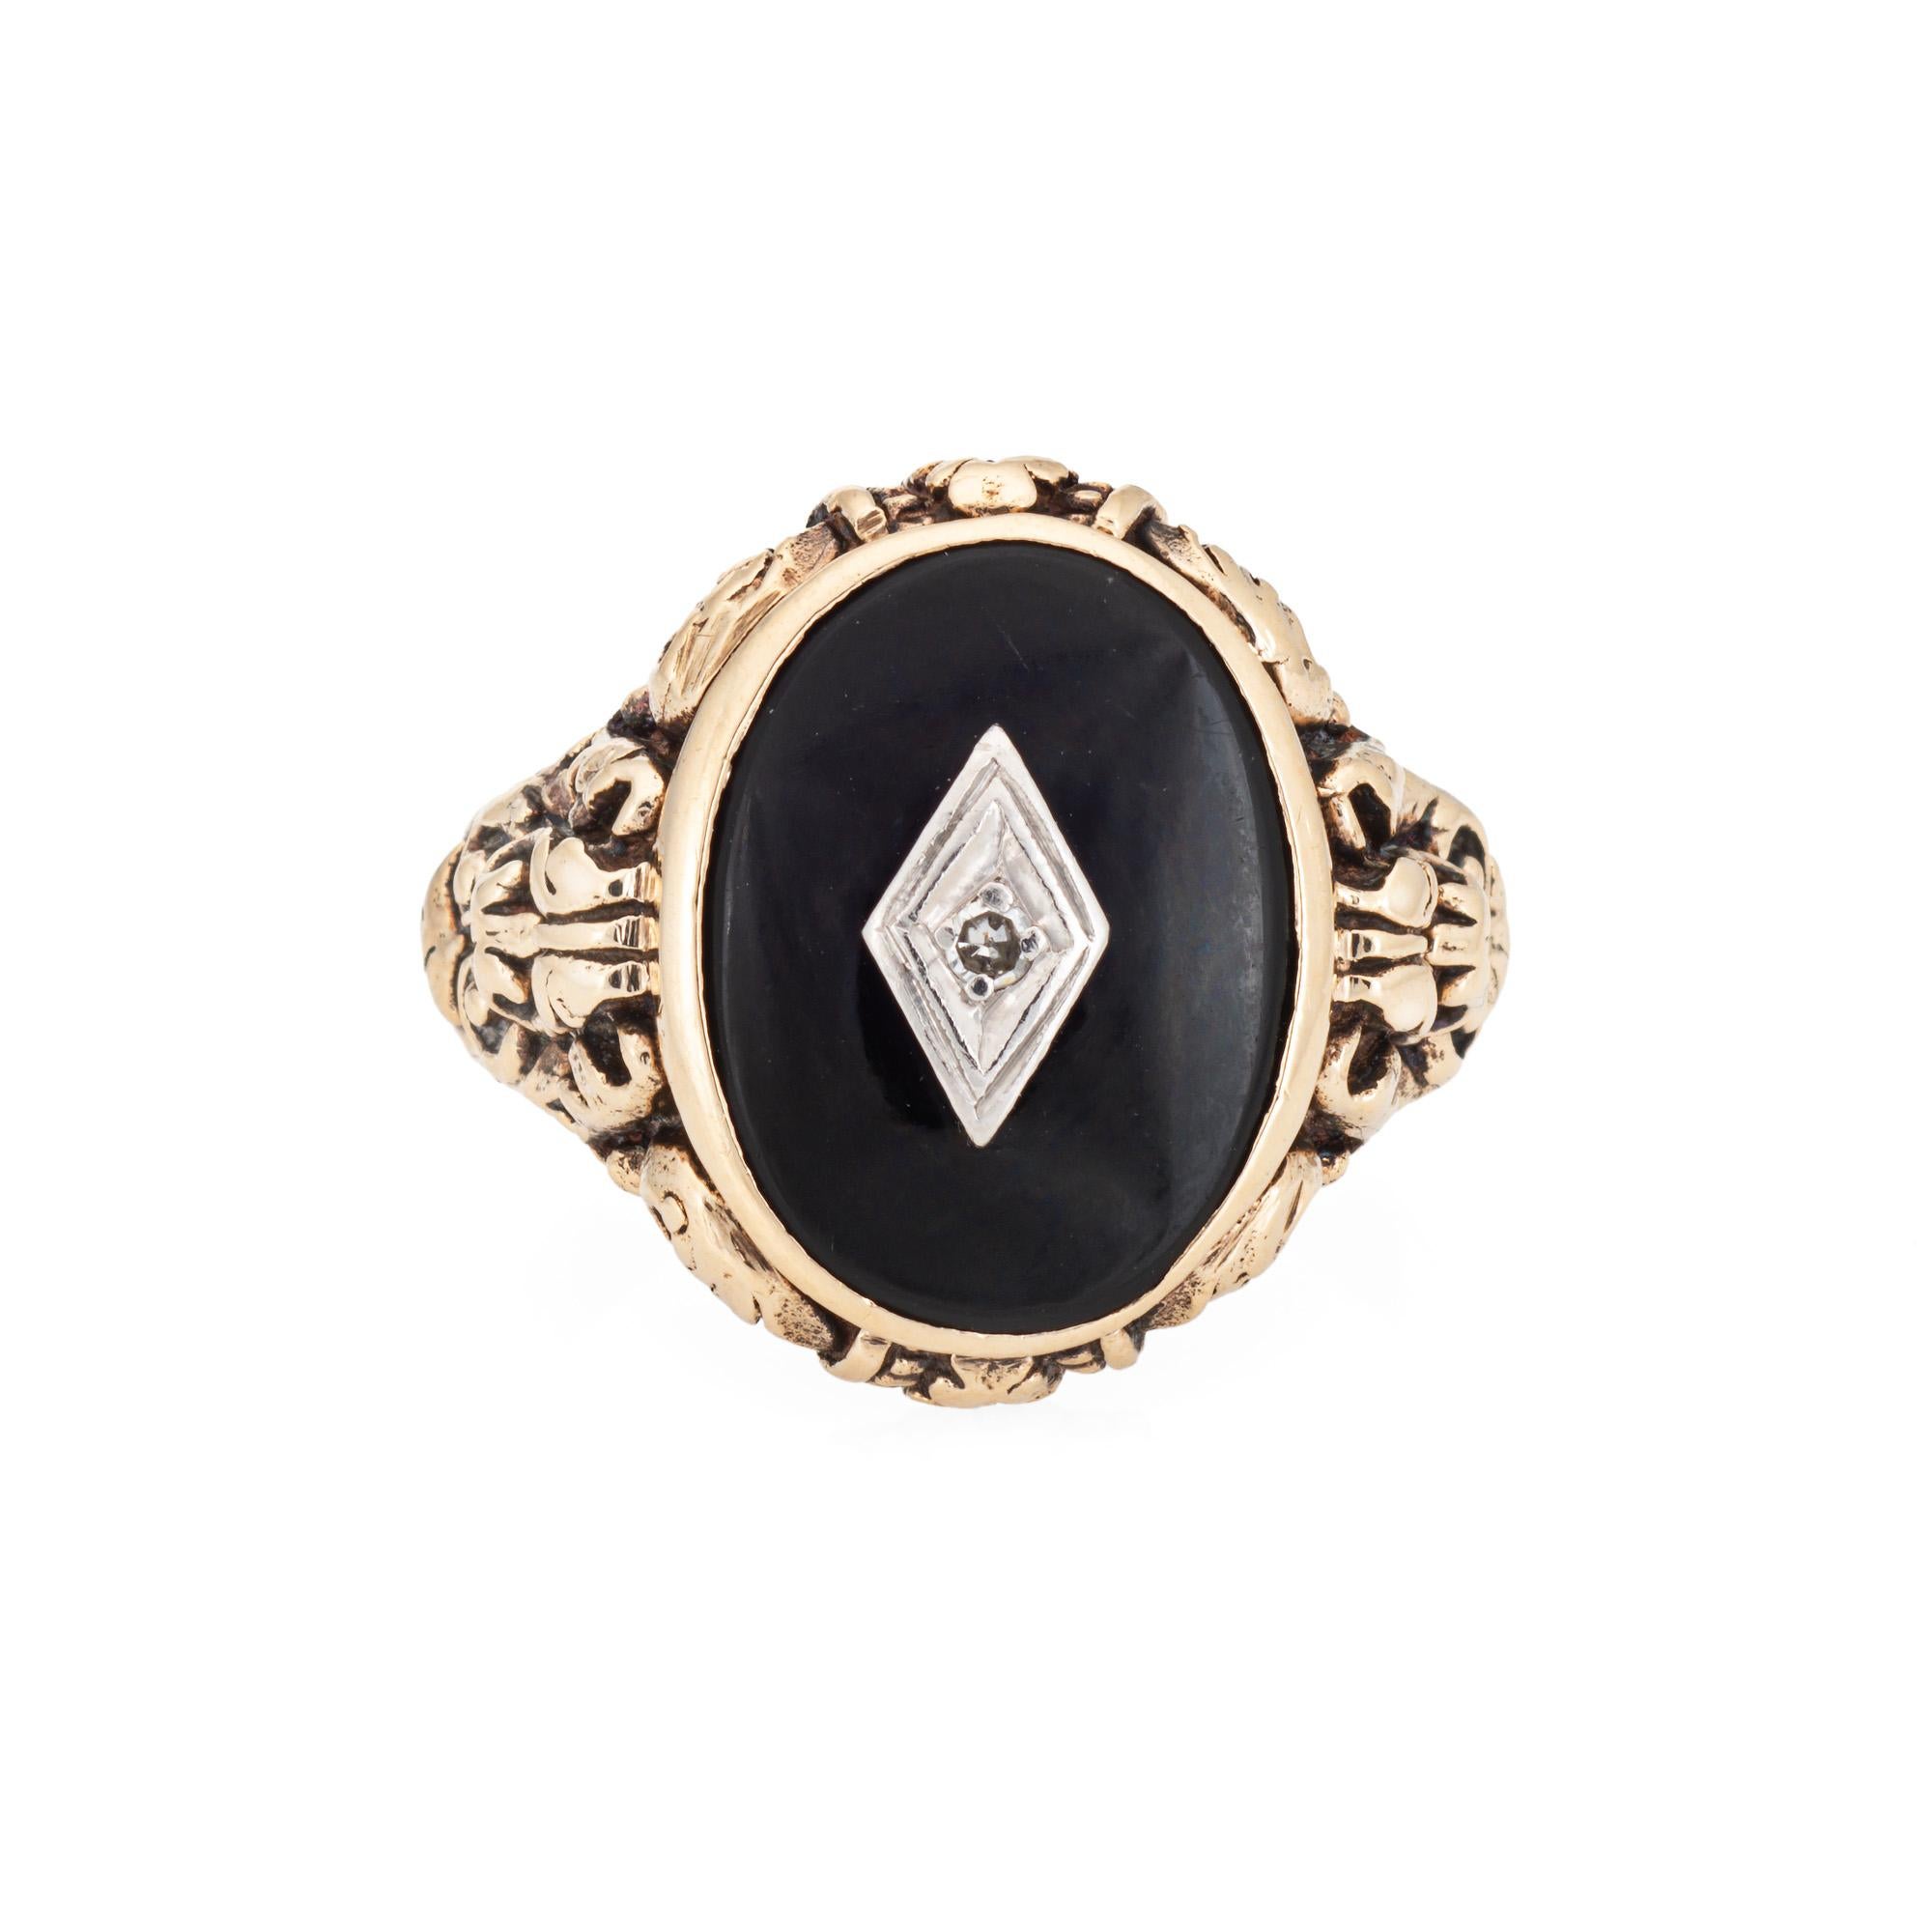 Finely detailed vintage Art Deco onyx & diamond ring (circa 1920s to 1930s) crafted in 10k yellow gold.  

Onyx measures 15mm x 11mm, accented with one estimated 0.01 carat single cut diamonds. The onyx is in good condition with light wear evident